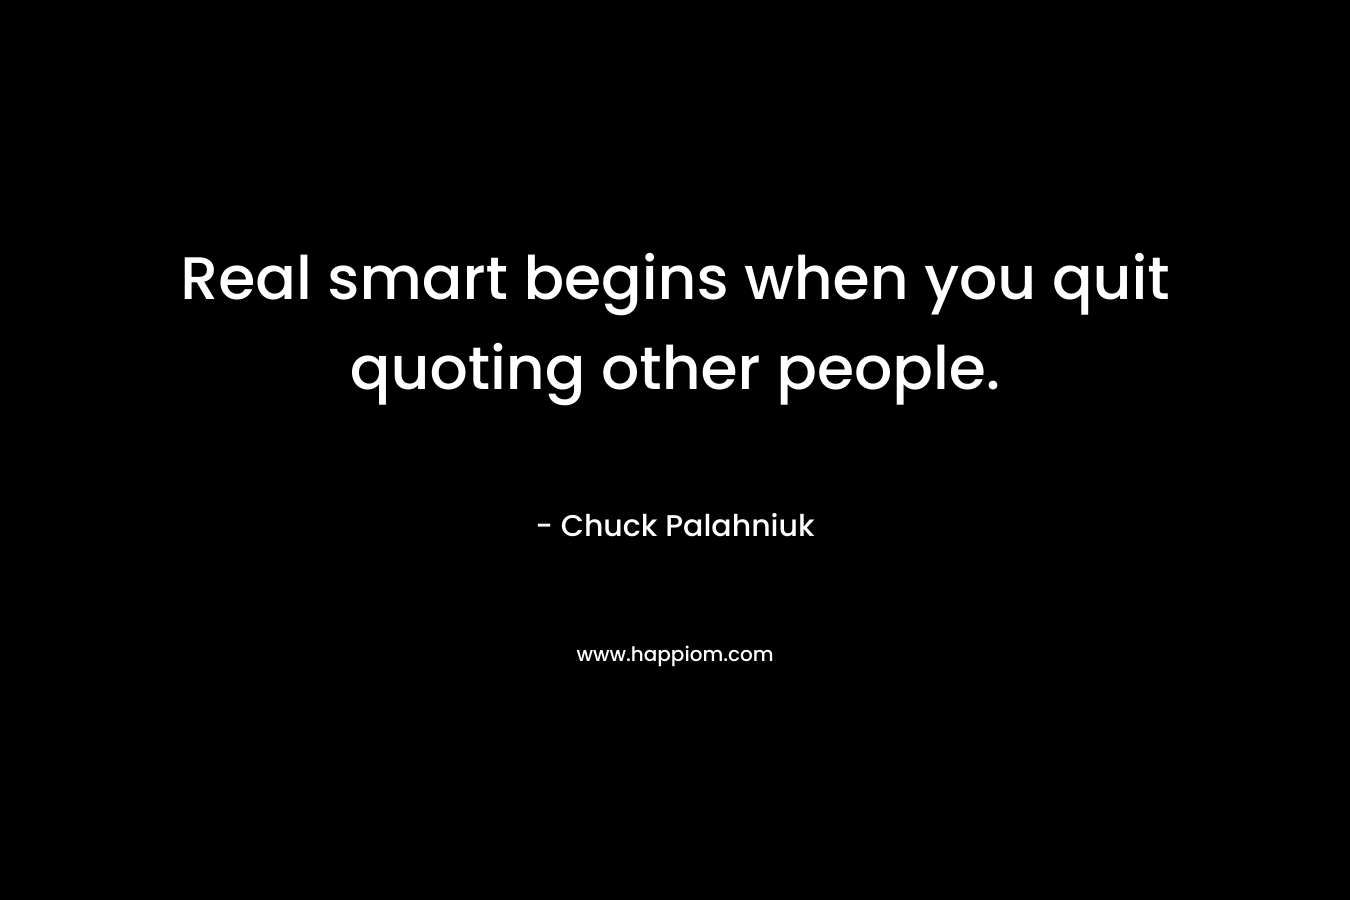 Real smart begins when you quit quoting other people. – Chuck Palahniuk